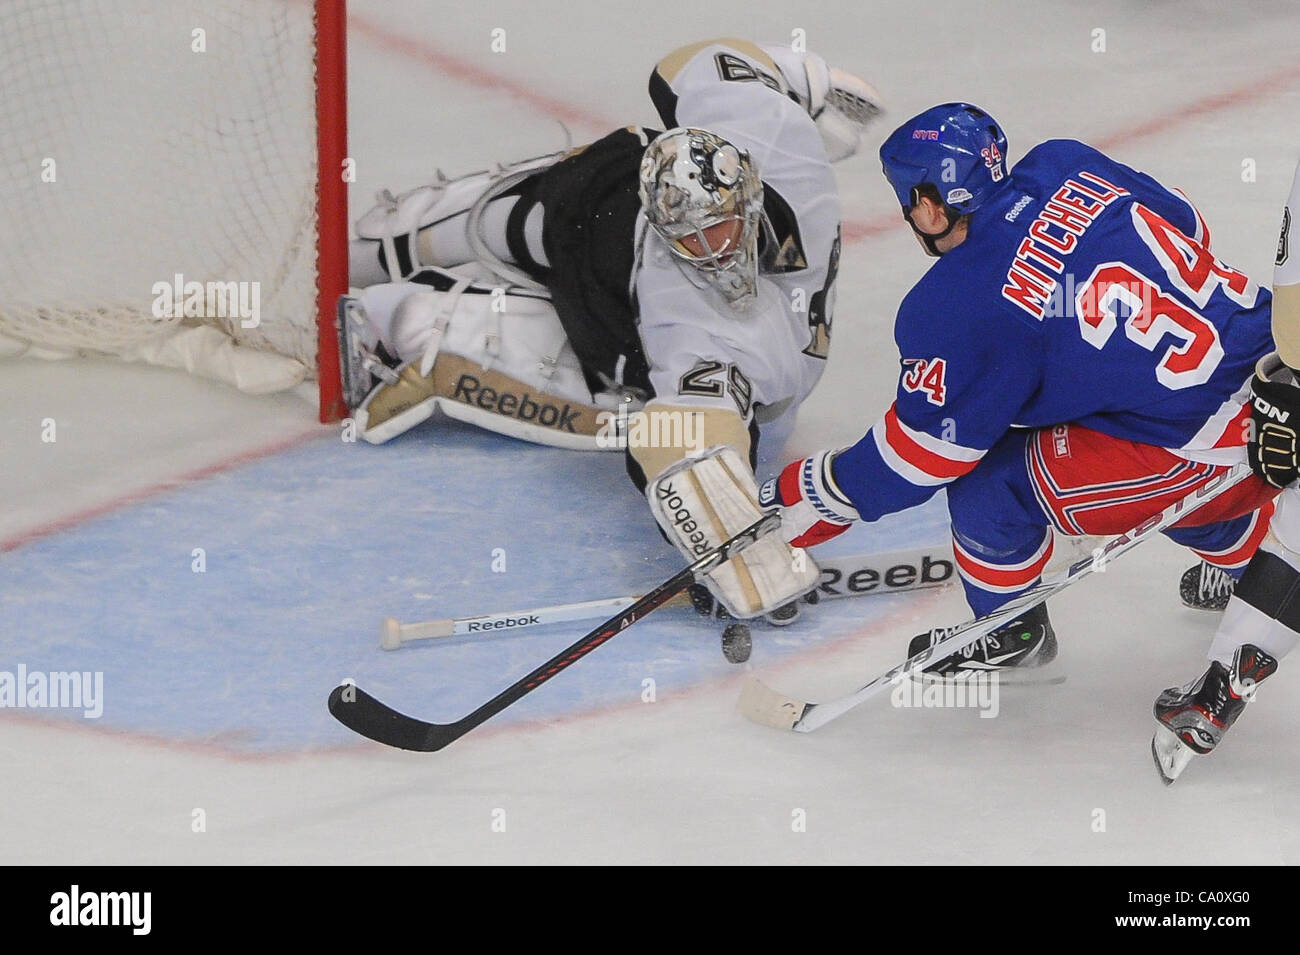 Mar. 15, 2012 - New York, New York, U.S - Pittsburgh Penguins goalie Marc-Andre Fleury (29) makes a spawning save on New York Rangers center John Mitchell (34) during third period NHL action between the Pittsburgh Penguins and the New York Rangers at Madison Square Garden in New York, N.Y. (Credit I Stock Photo